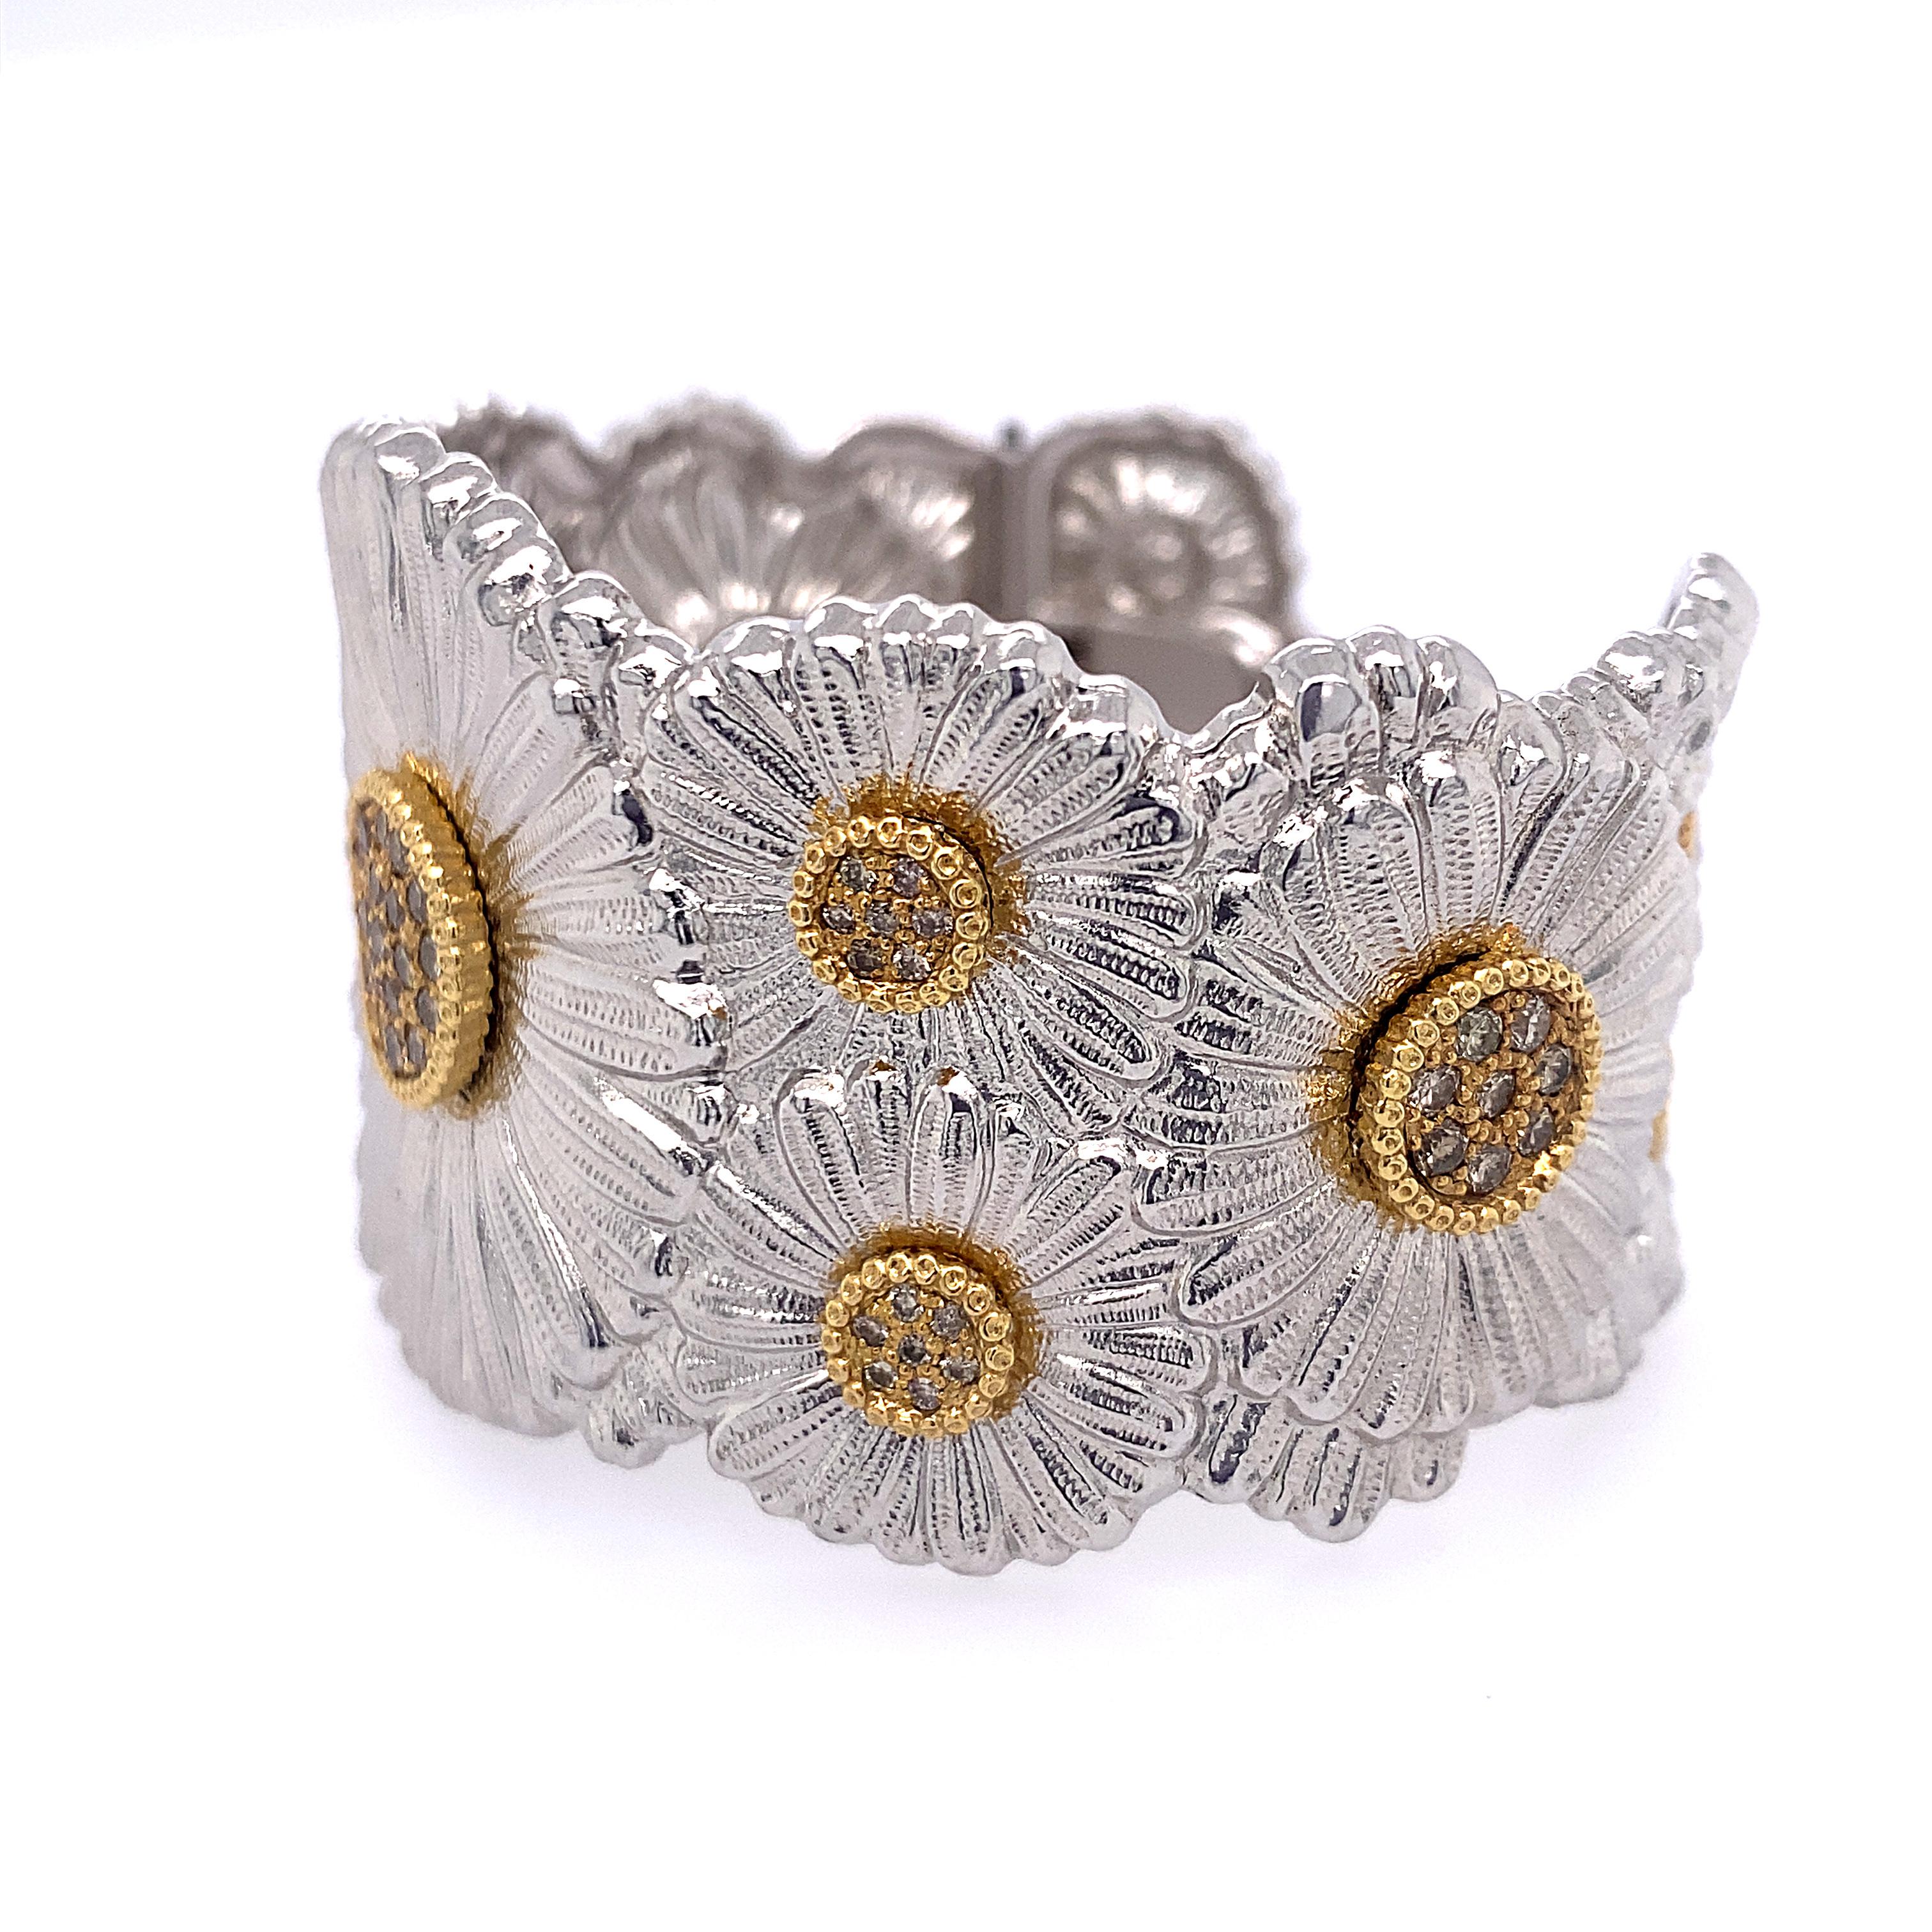 18k yellow gold and sterling silver Diamond  wide cuff bracelet by Buccellati, depicting Daisy flowers. Will fit approx. 7 